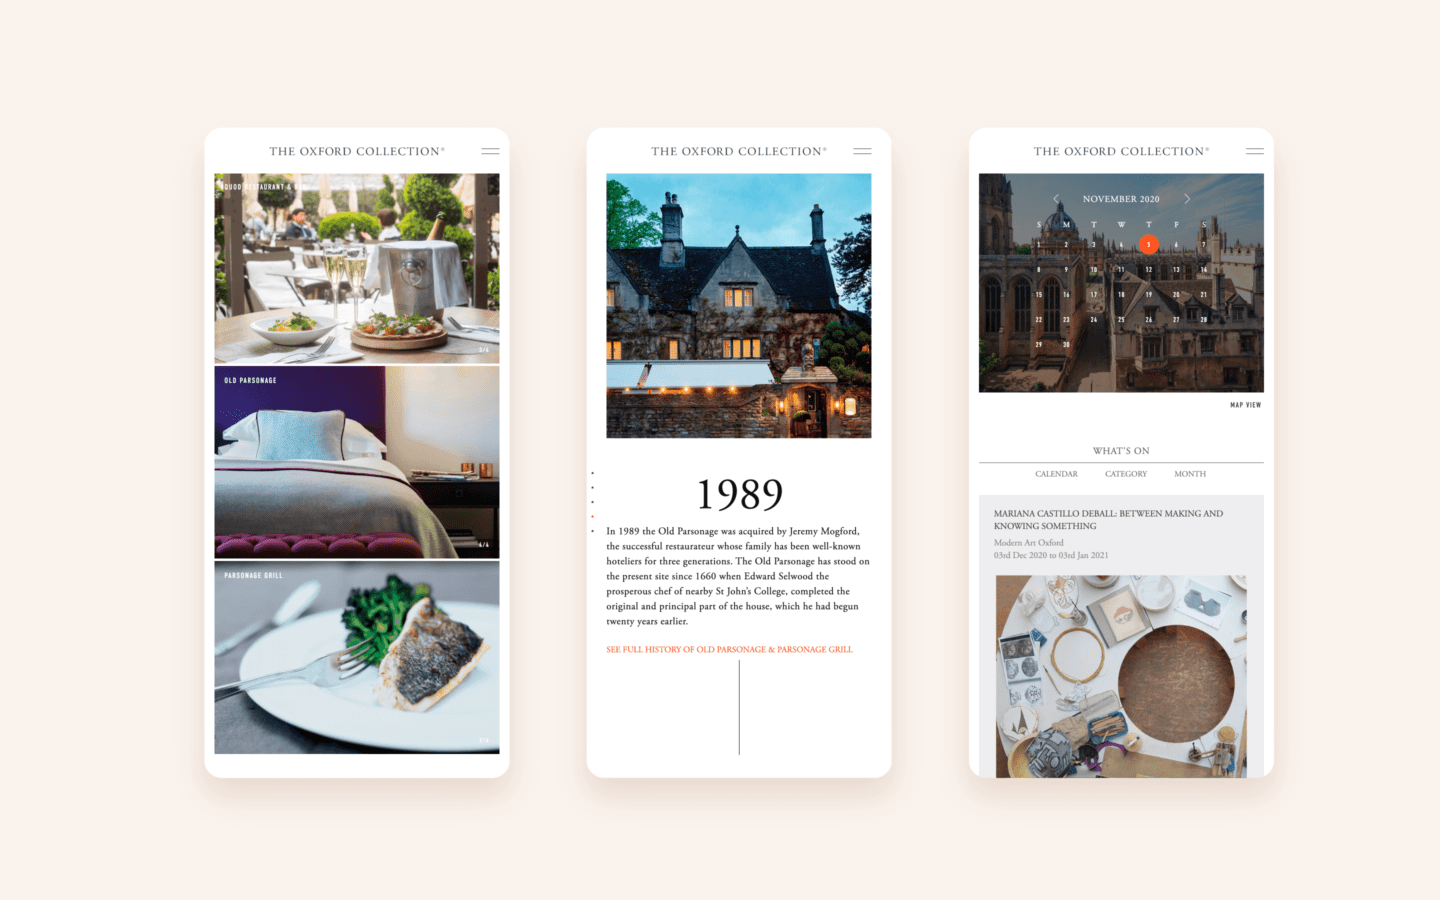 The Oxford Collection website development